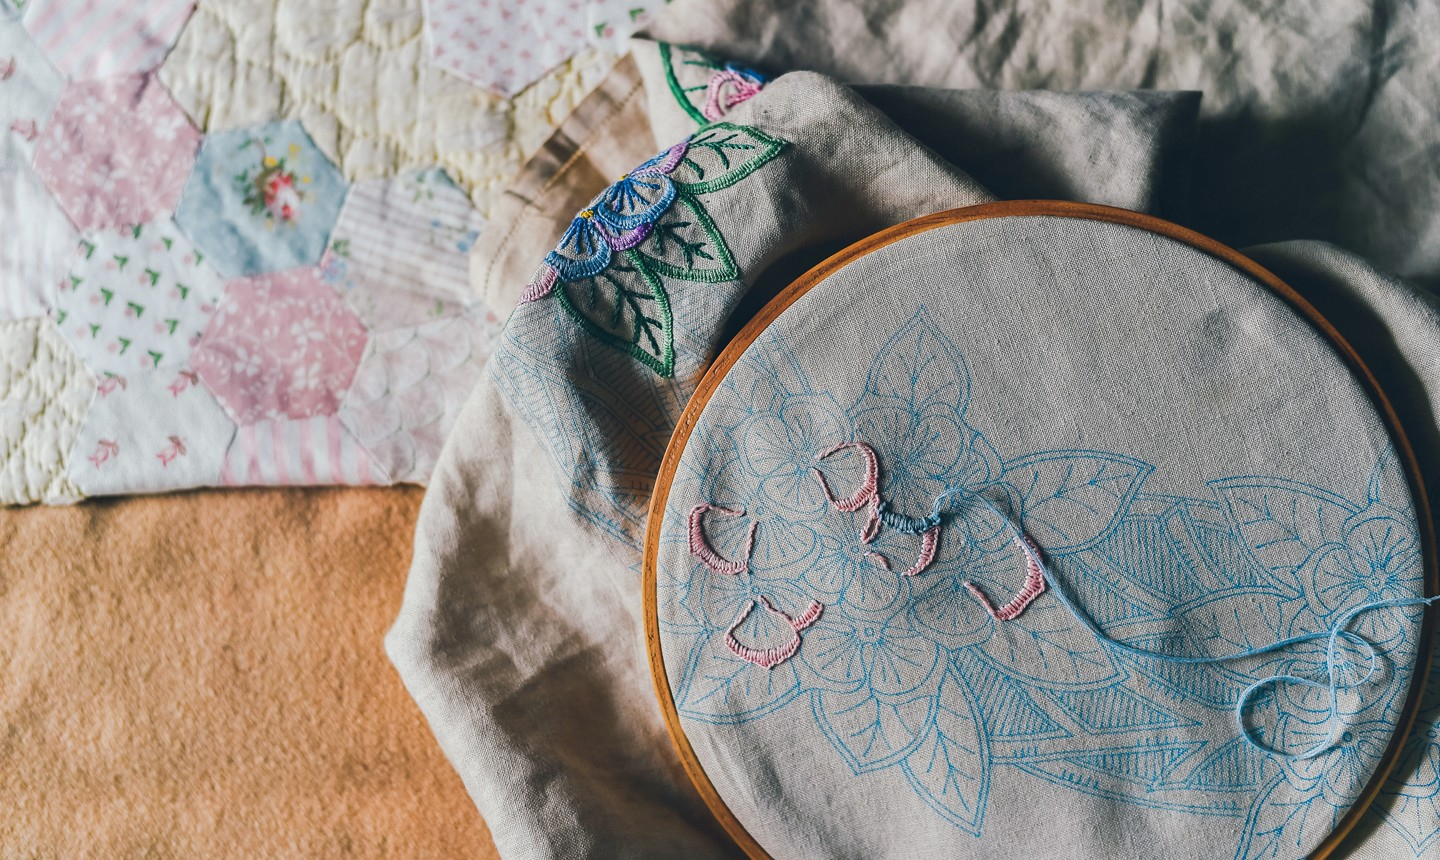 Custom Embroidery Patterns 5 Simple Ways To Transfer Embroidery Designs